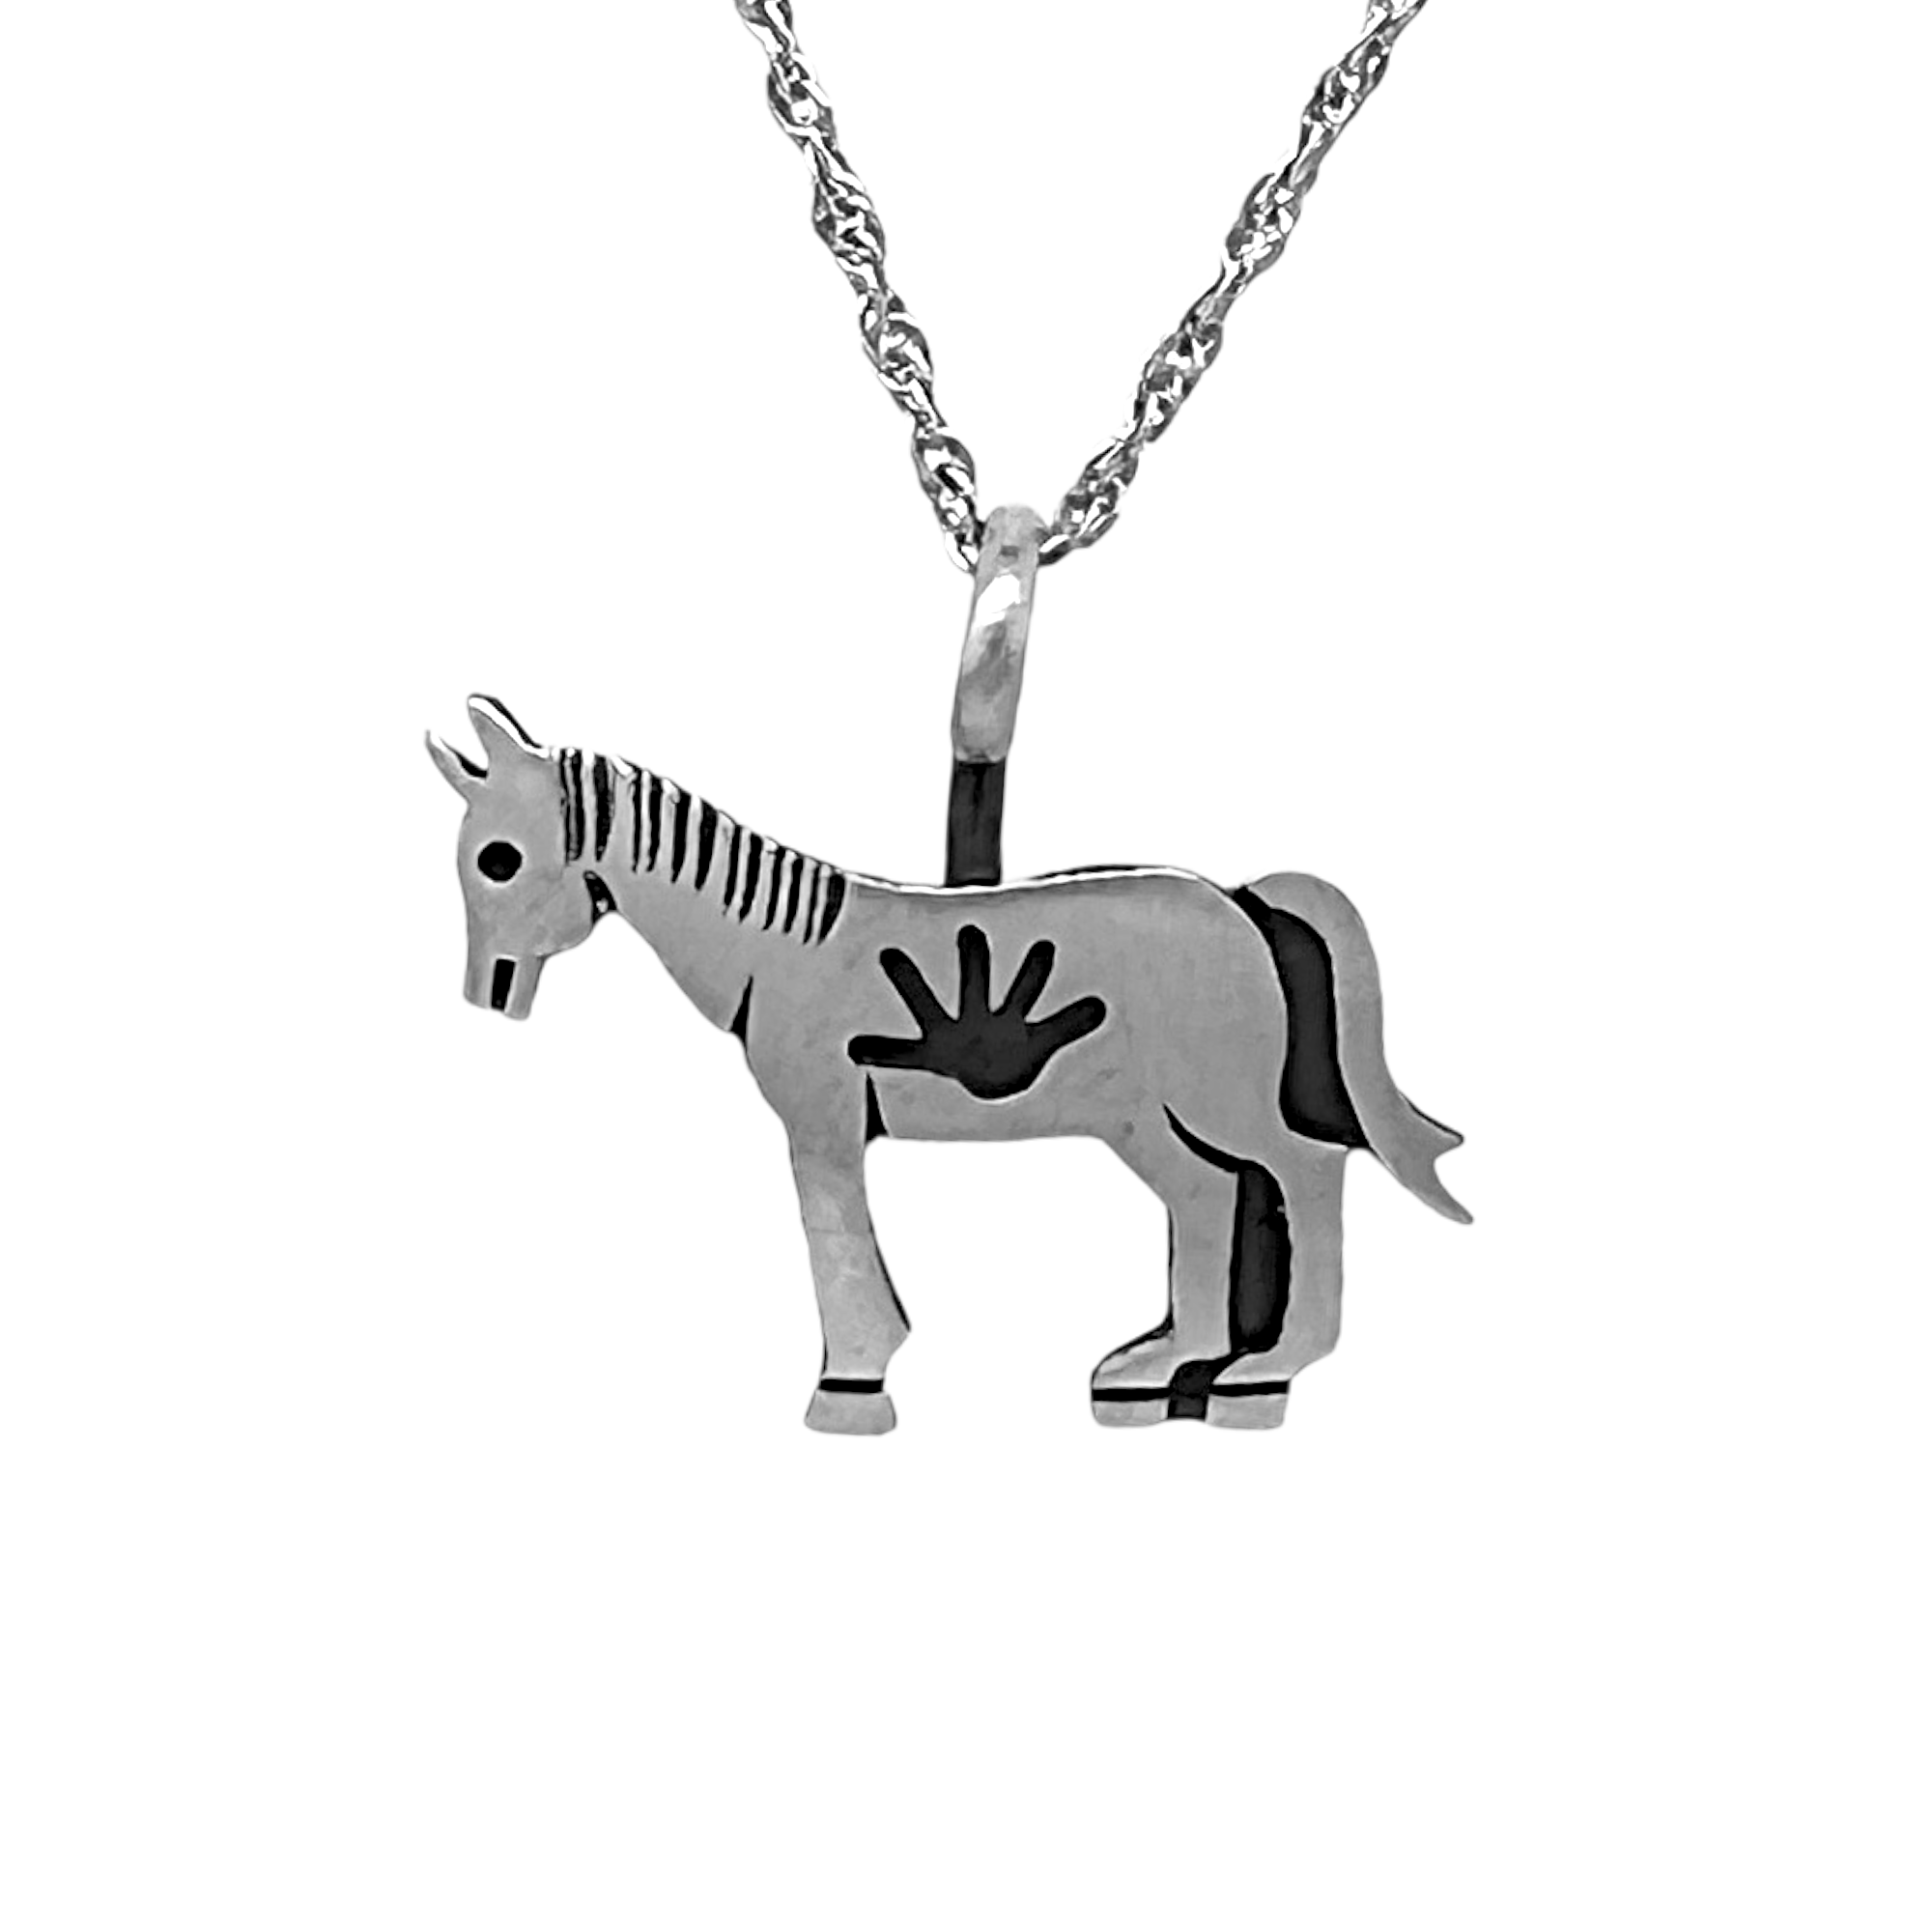 YFN Girl and Horse Necklace for Girls Sterling Silver Horse Jewellery Horse  Gifts for Women (Black Horse with Girl Necklace) : Amazon.co.uk: Fashion